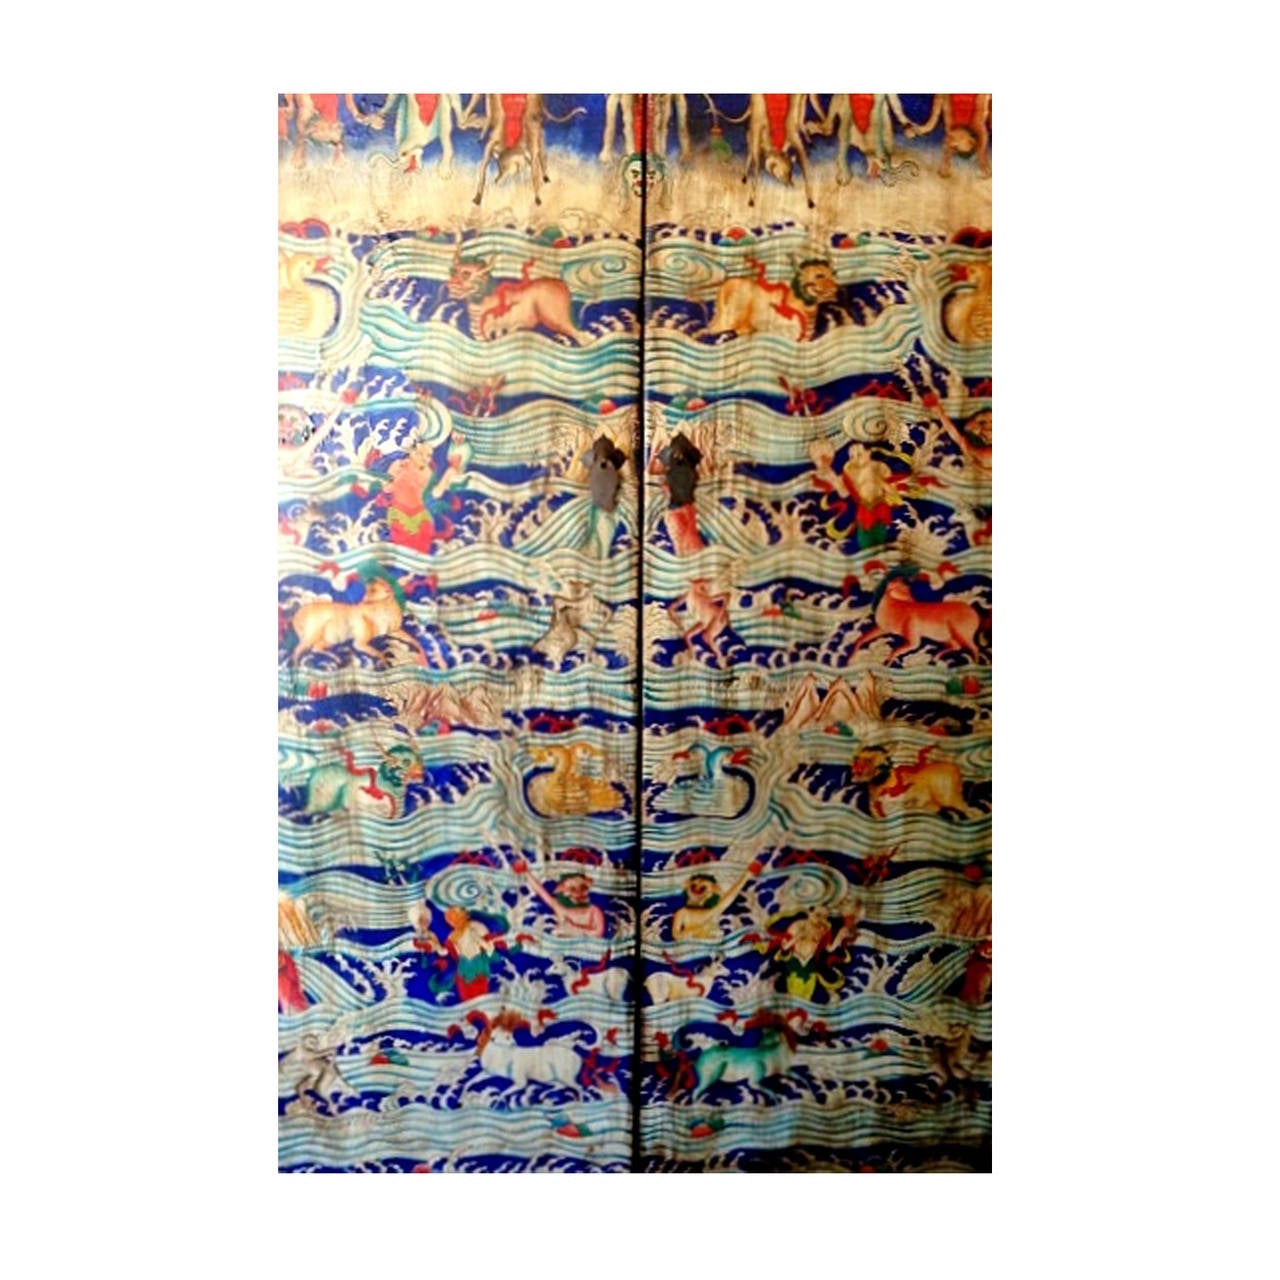 This magnificent cabinet is completely hand painted. Its depiction demonstrates the Tibetan theory of reincarnation. Myriads of saturated colors were employed to express fantastic artistry, colors such as burned orange, butterscotch saffron, and